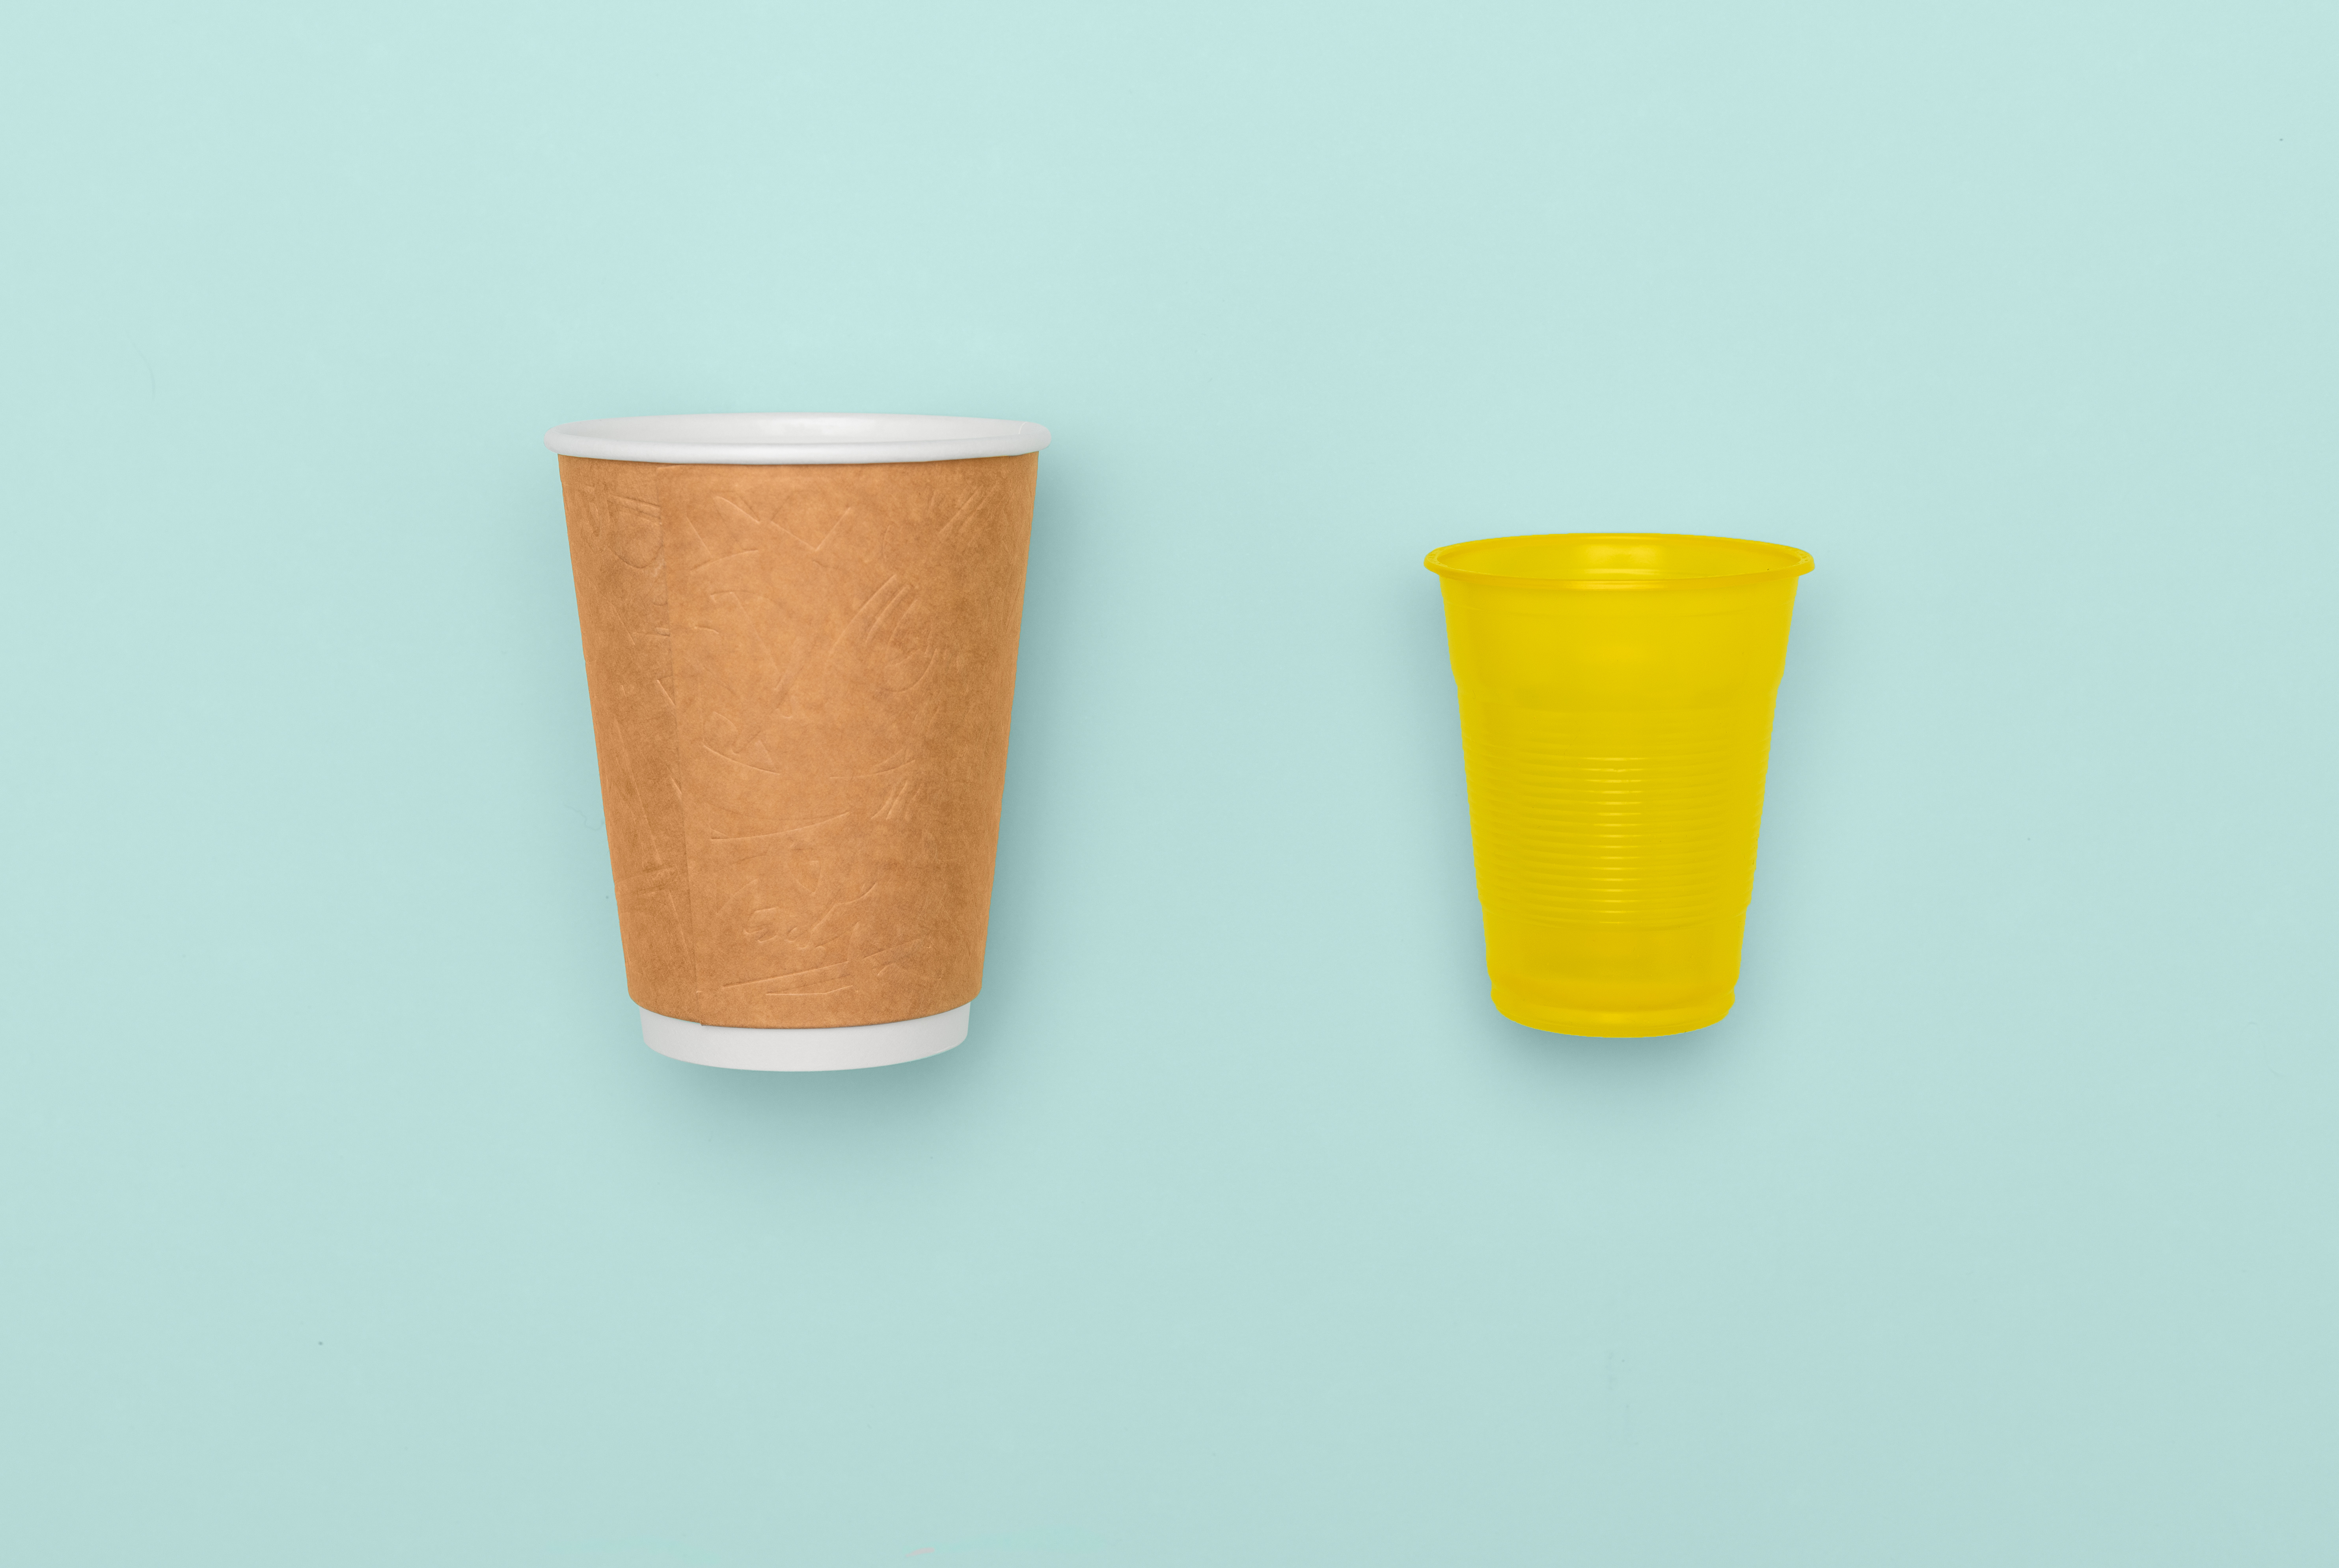 Plastic and paper cups in contrast